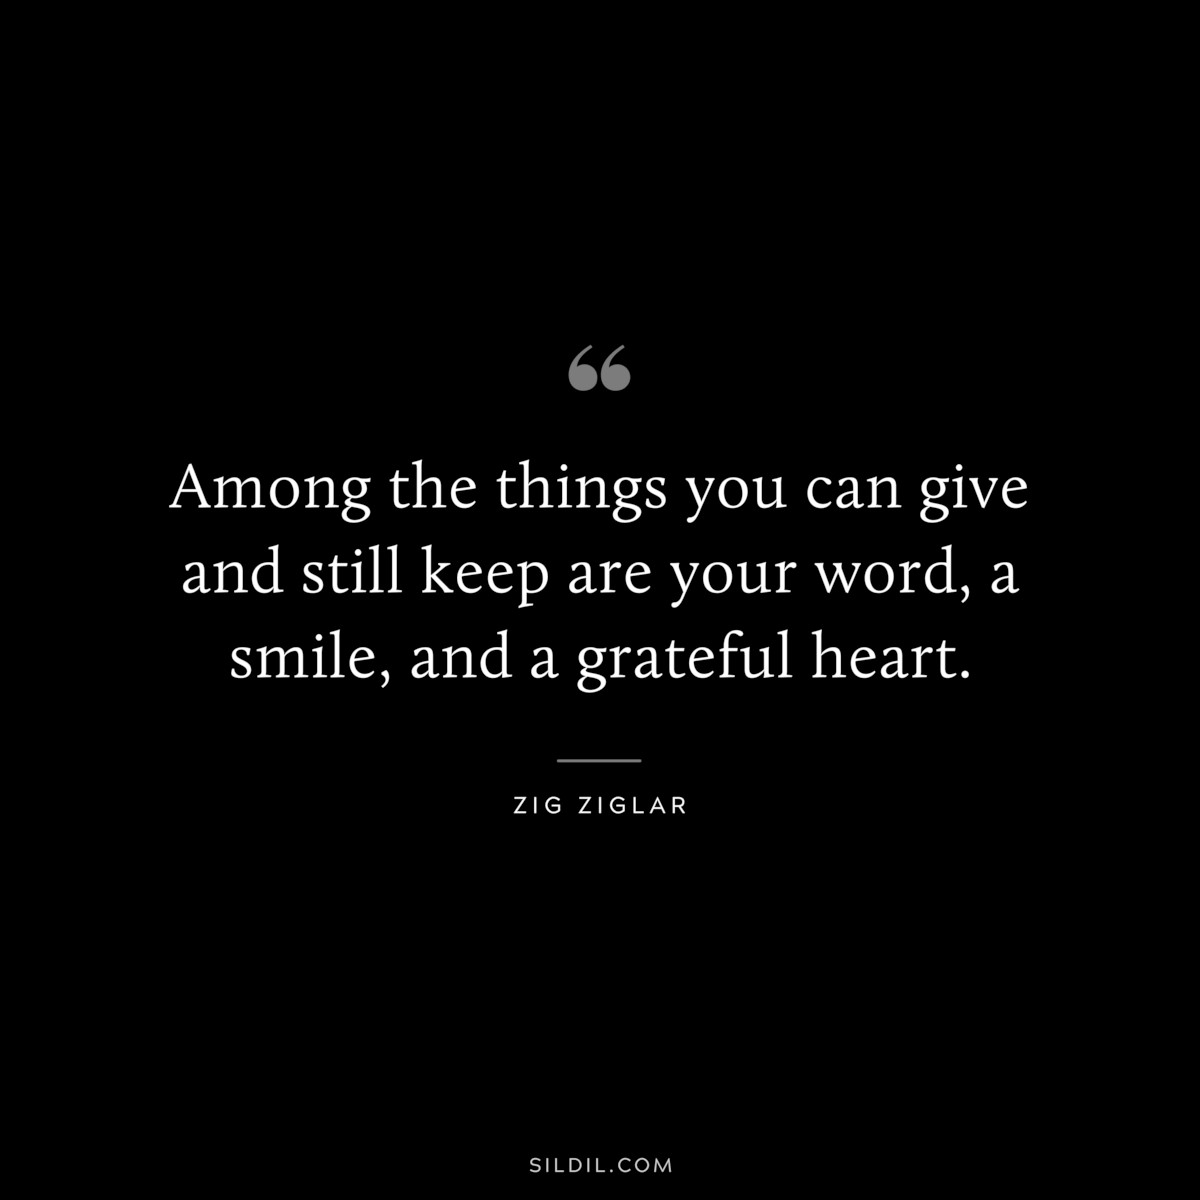 Among the things you can give and still keep are your word, a smile, and a grateful heart. ― Zig Ziglar